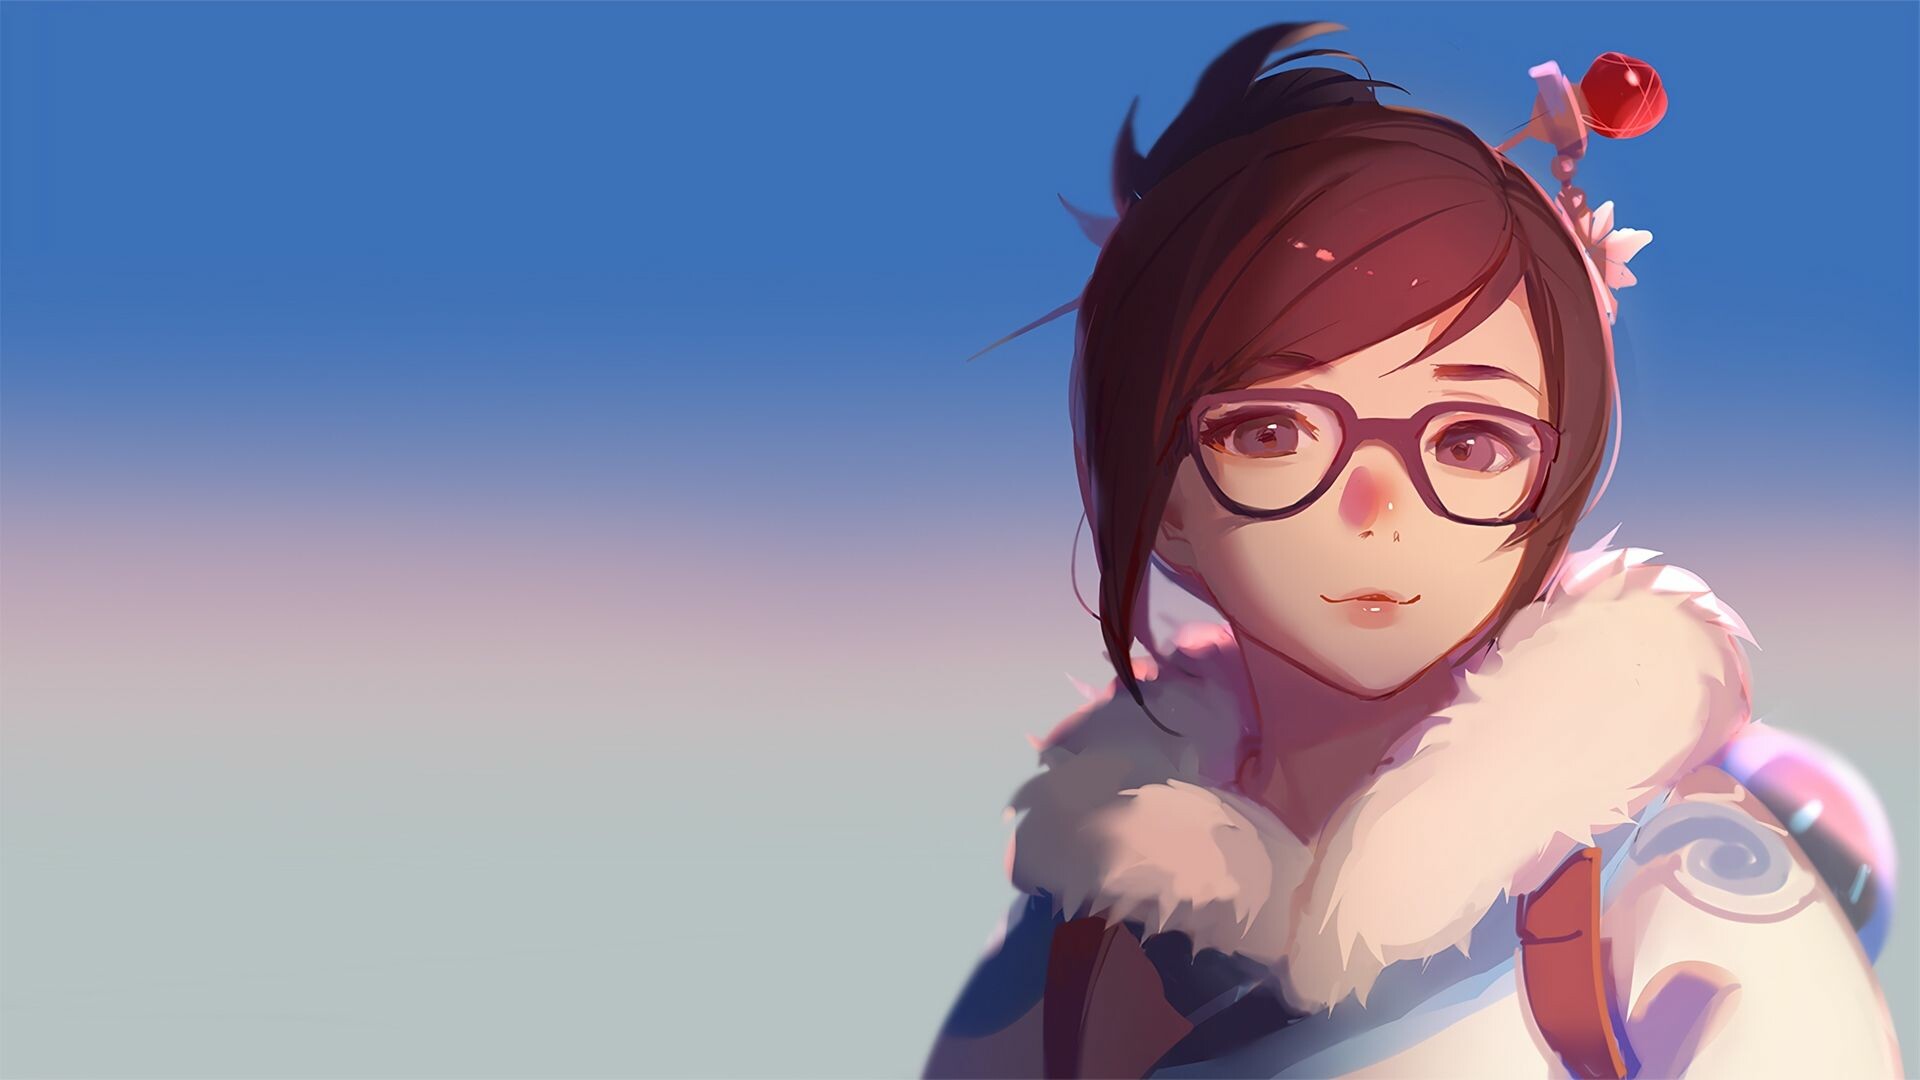 Overwatch: Mei, Uses an Endothermic Blaster to Cryo-Freeze herself. 1920x1080 Full HD Wallpaper.